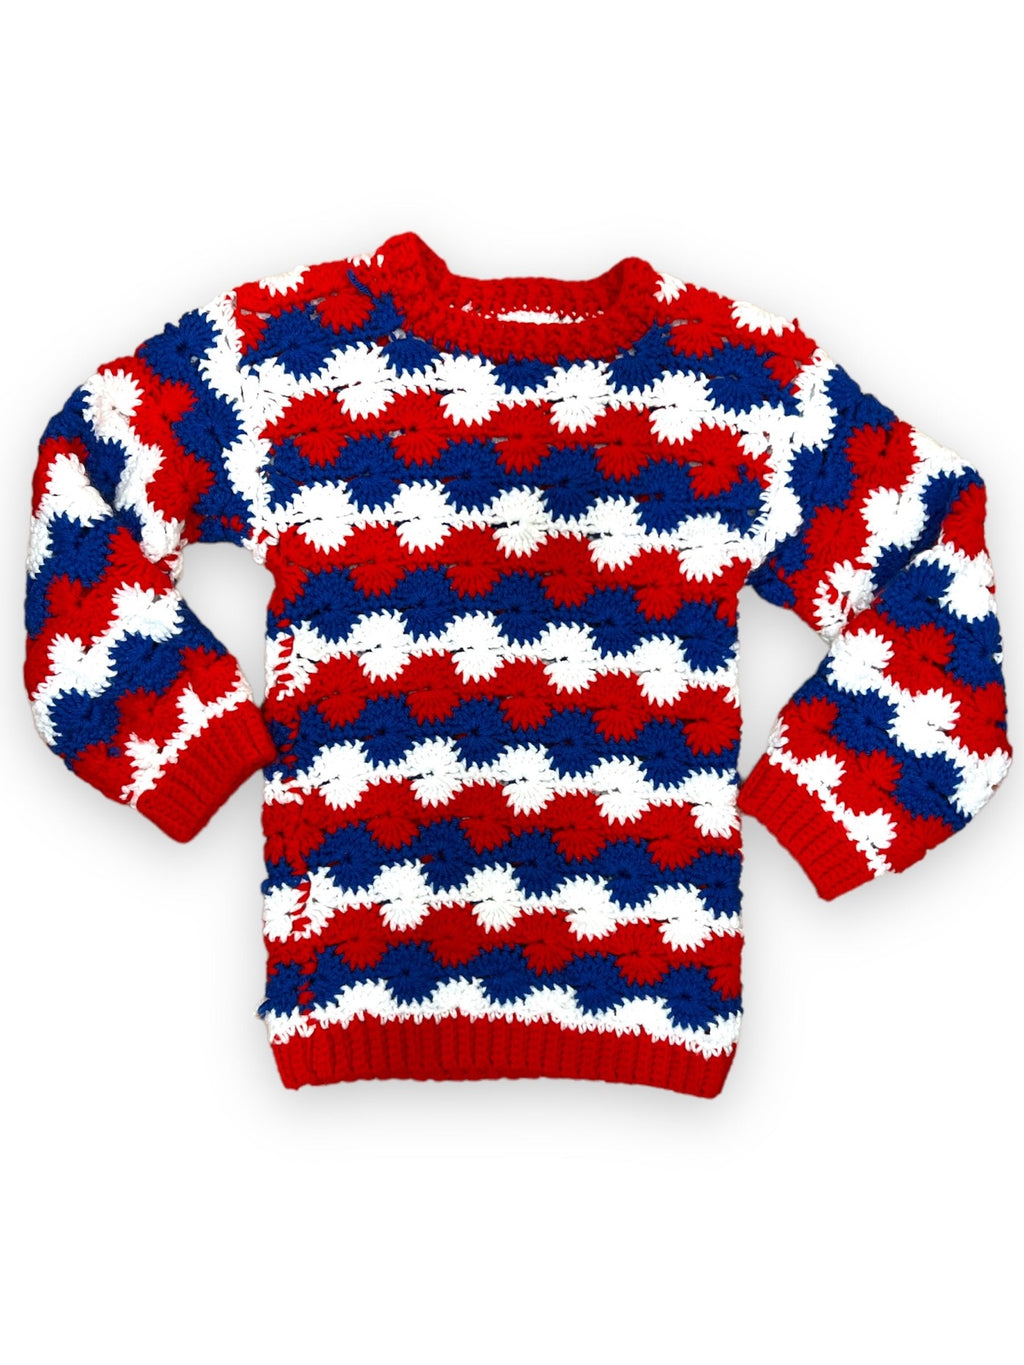 RED WHITE & BLUE KIDS SWEATER